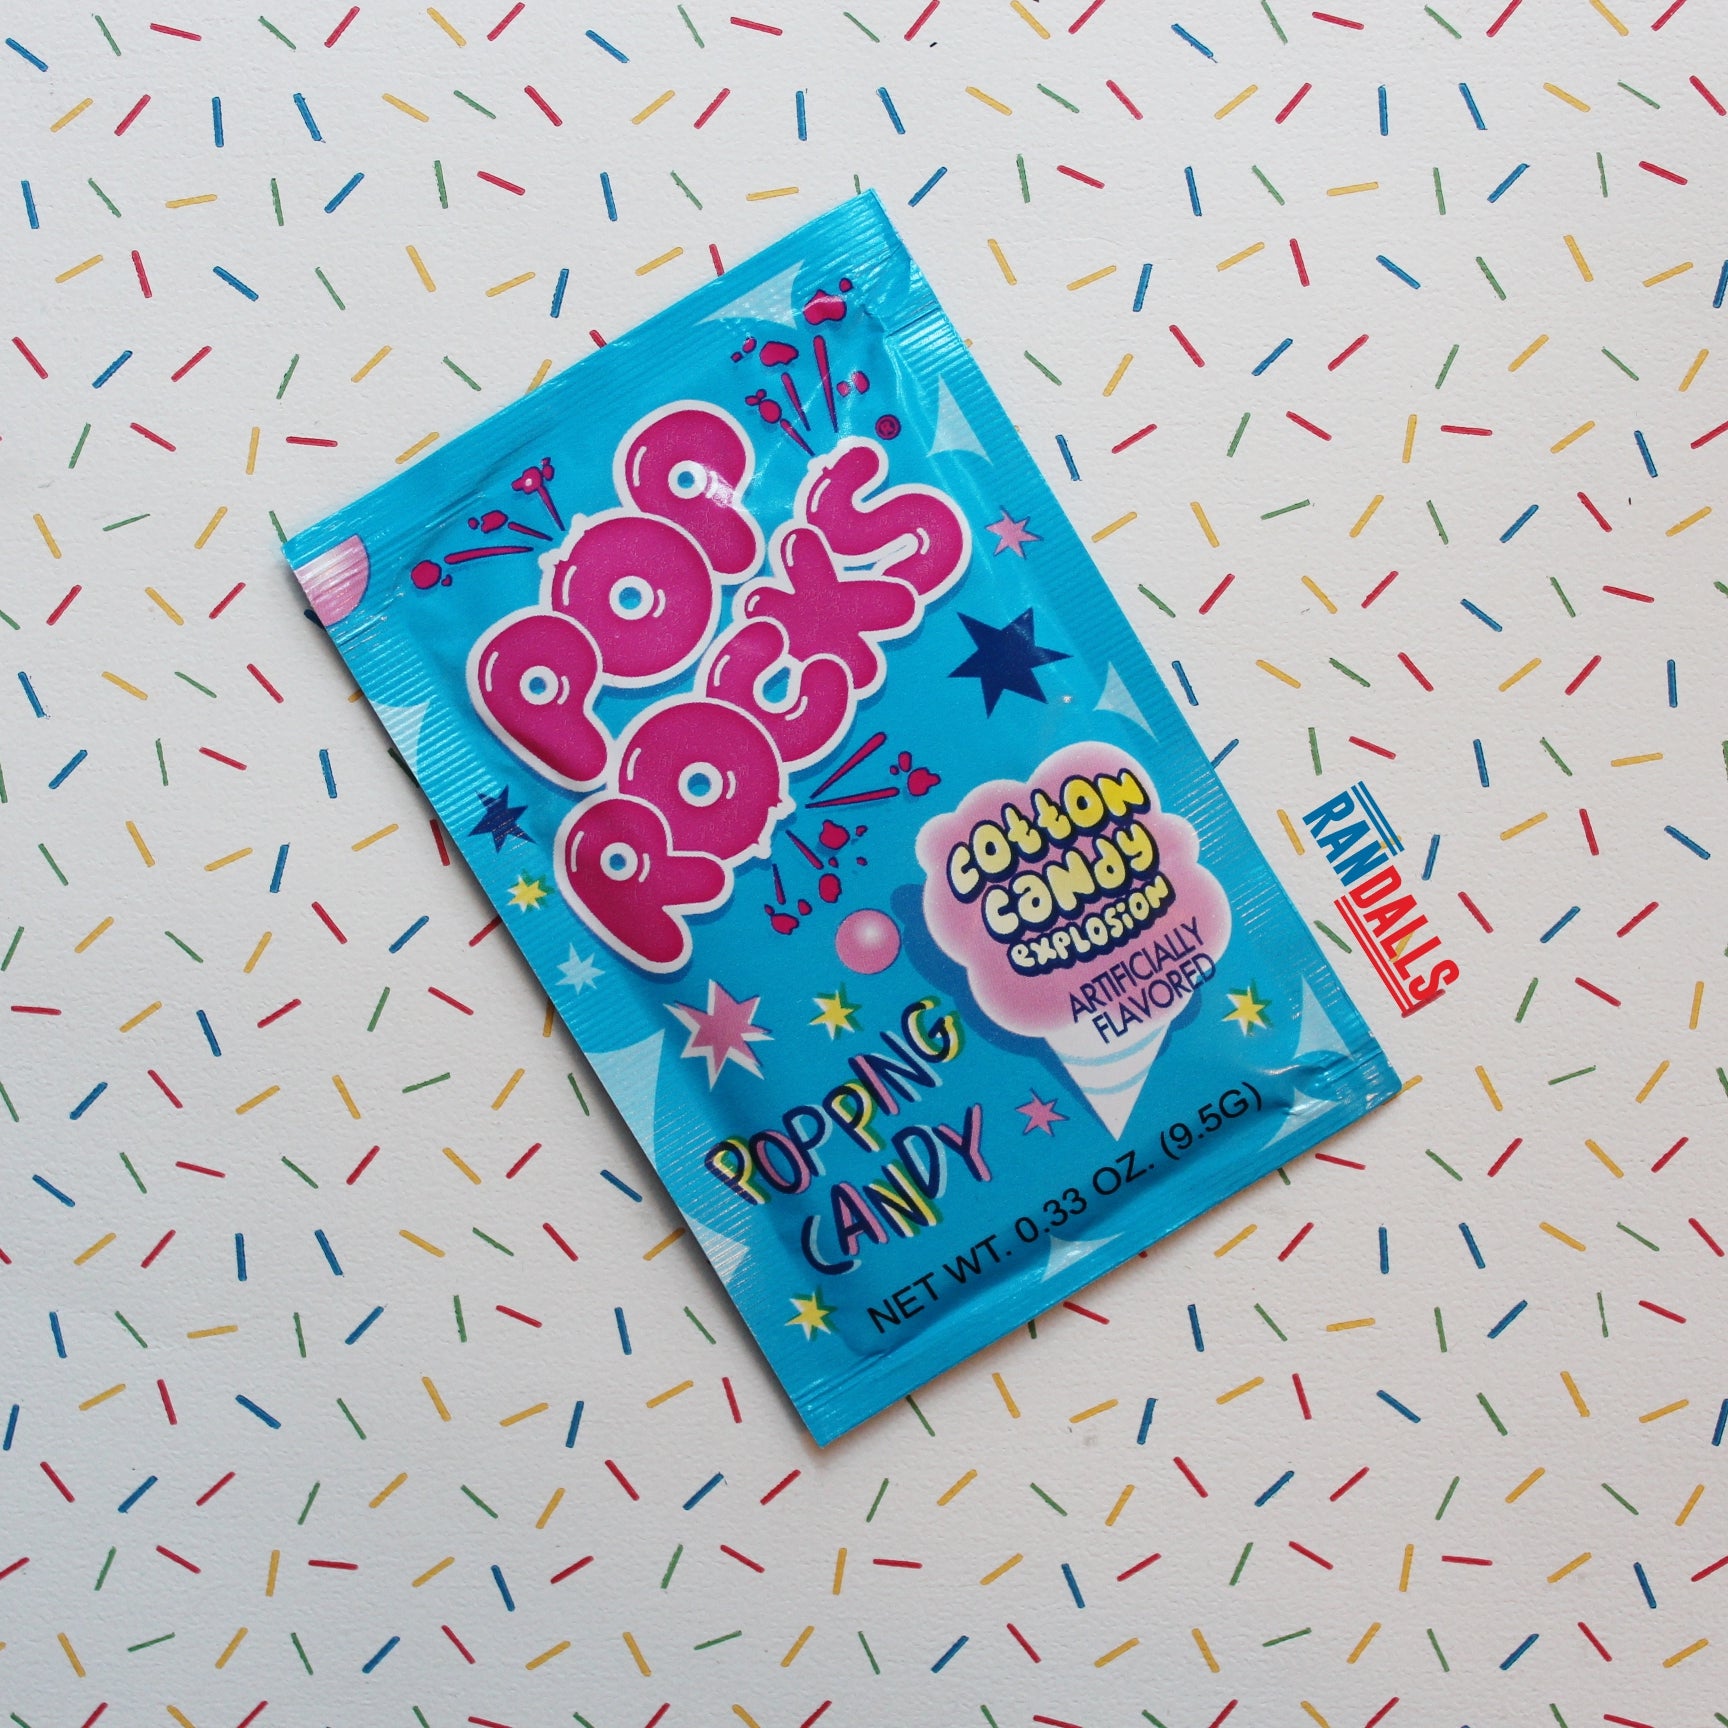 pop rocks, cotton candy explosion, popping candy, crackling sweet, randalls